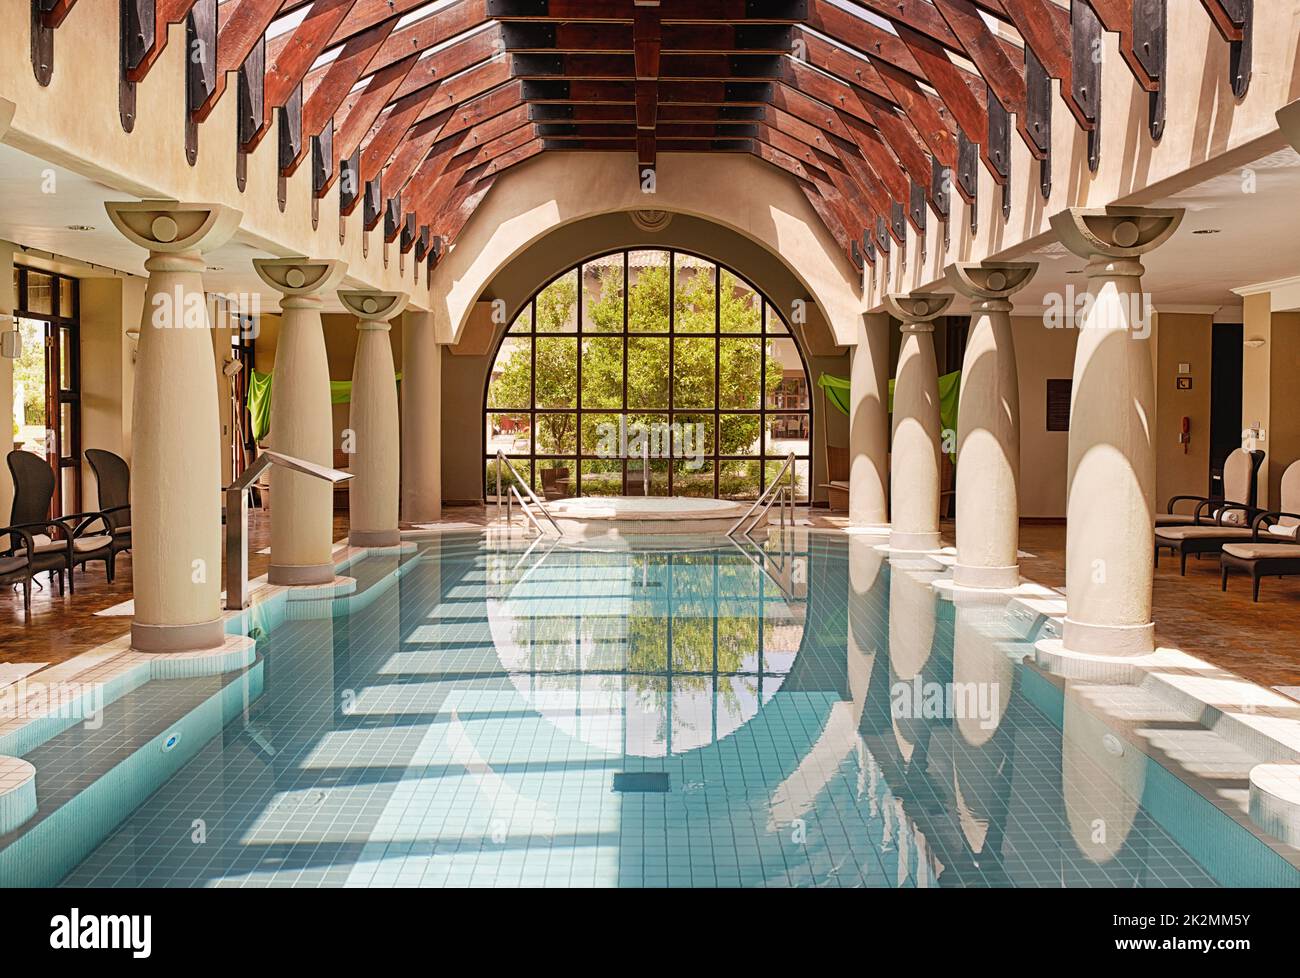 What a perfectly placid pool. Shot of an indoor swimming pool at a health spa. Stock Photo